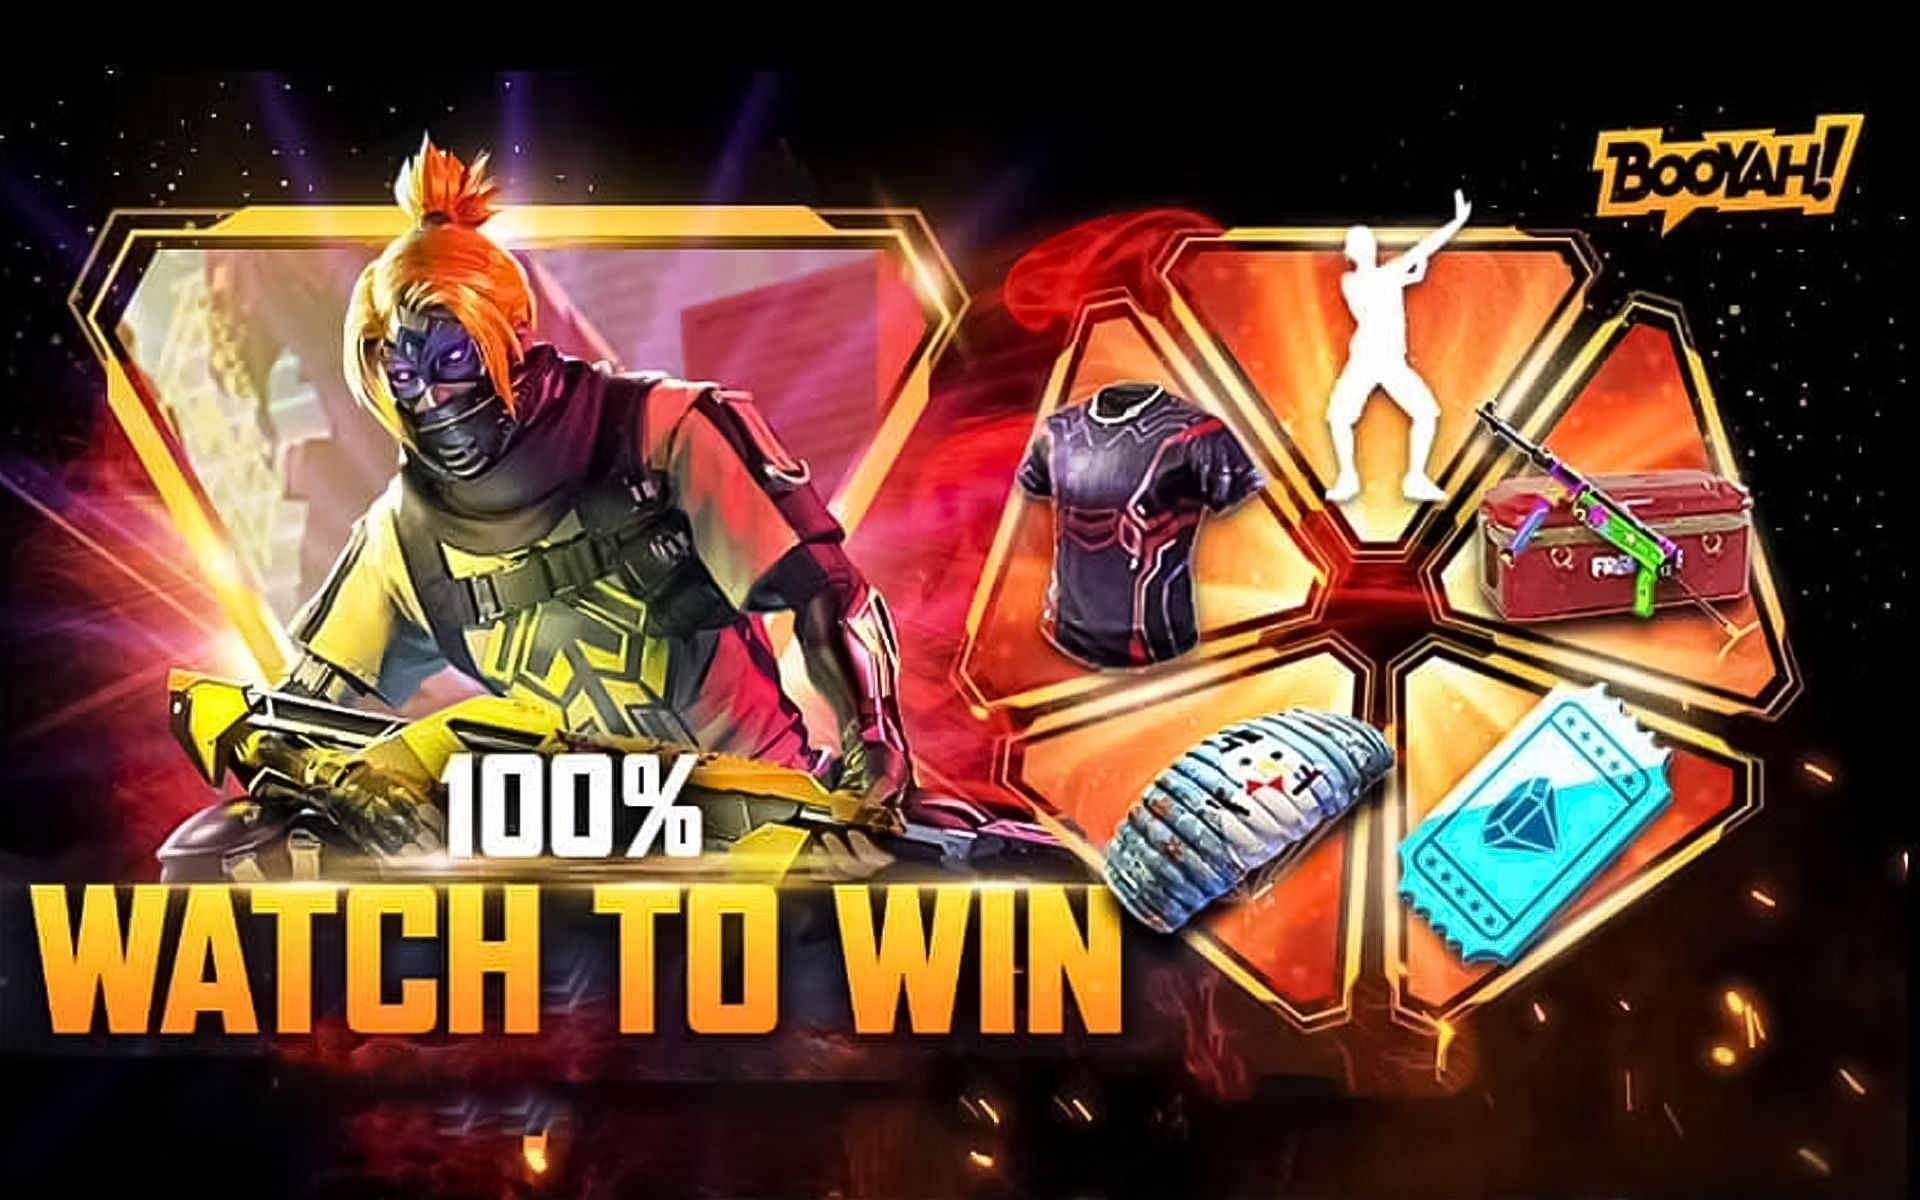 Some of the rewards offered by the latest Watch to Win event in the battle royale game (Image via Garena)